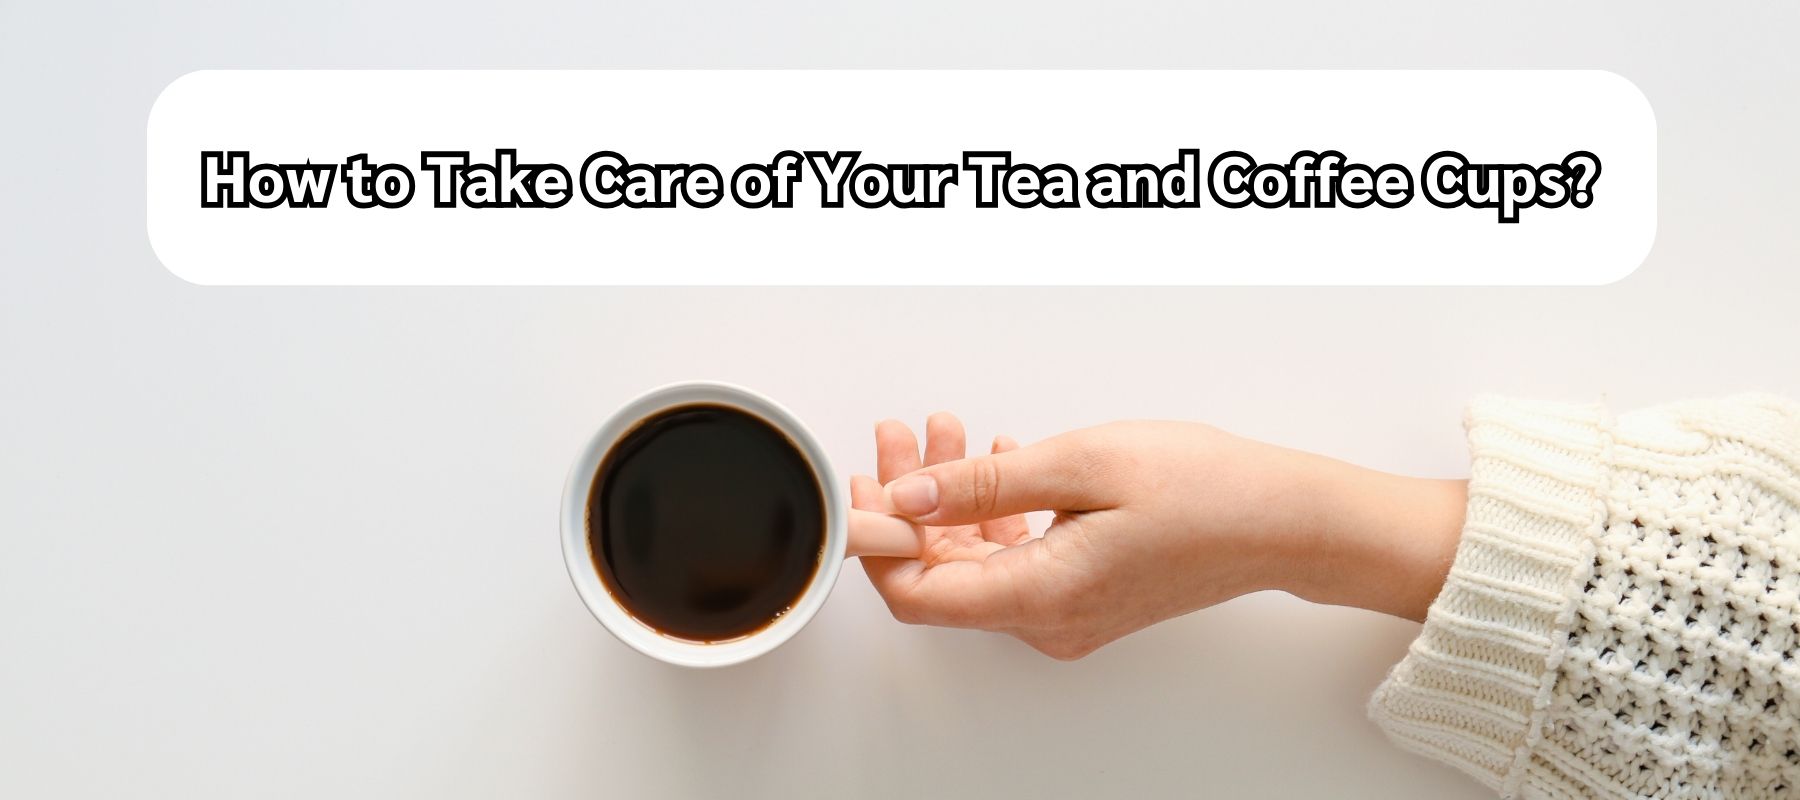 How-to-Take-Care-of-Your-Tea-and-Coffee-Cups?